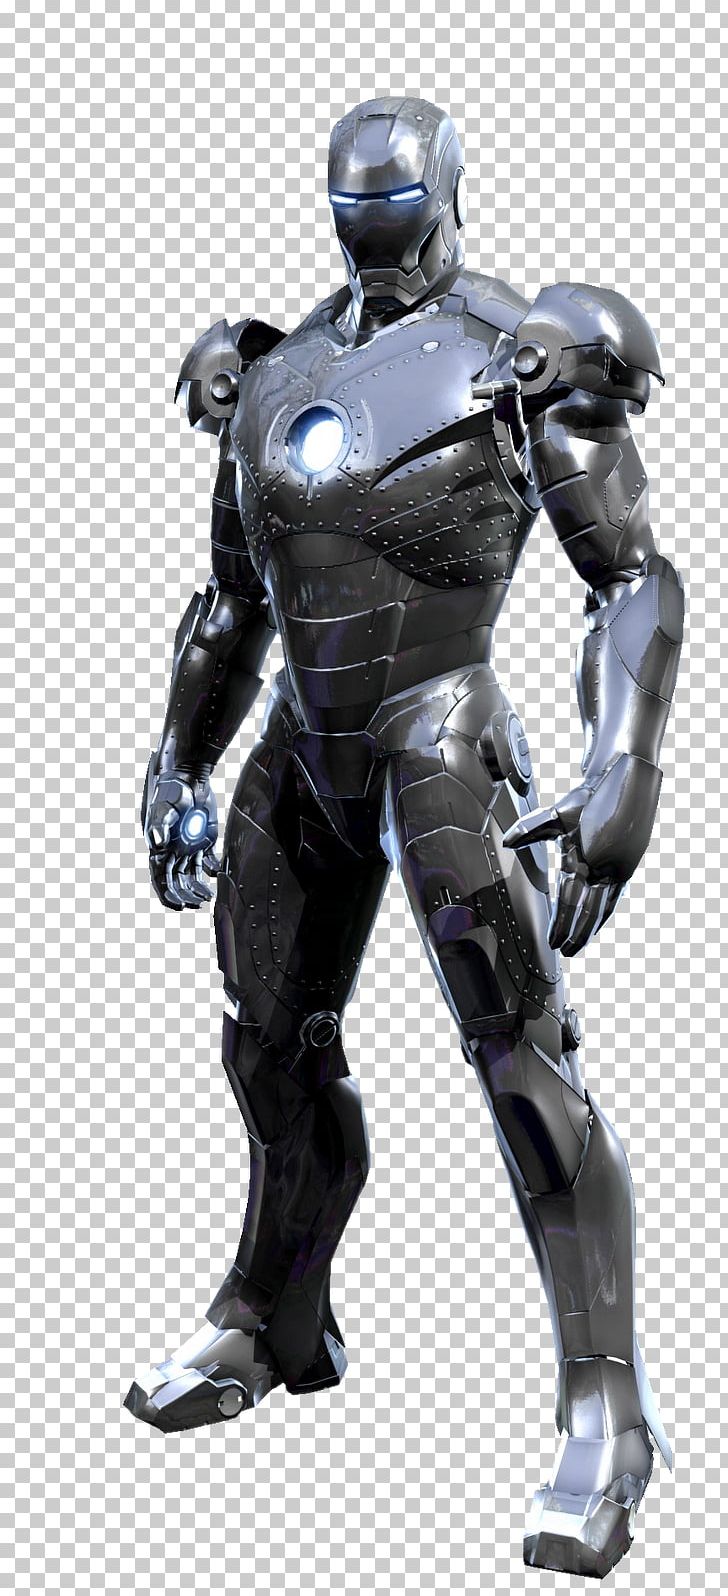 Iron Man's Armor War Machine Iron Monger Pepper Potts PNG, Clipart, Action Figure, Armour, Comic, Fictional Character, Figurine Free PNG Download